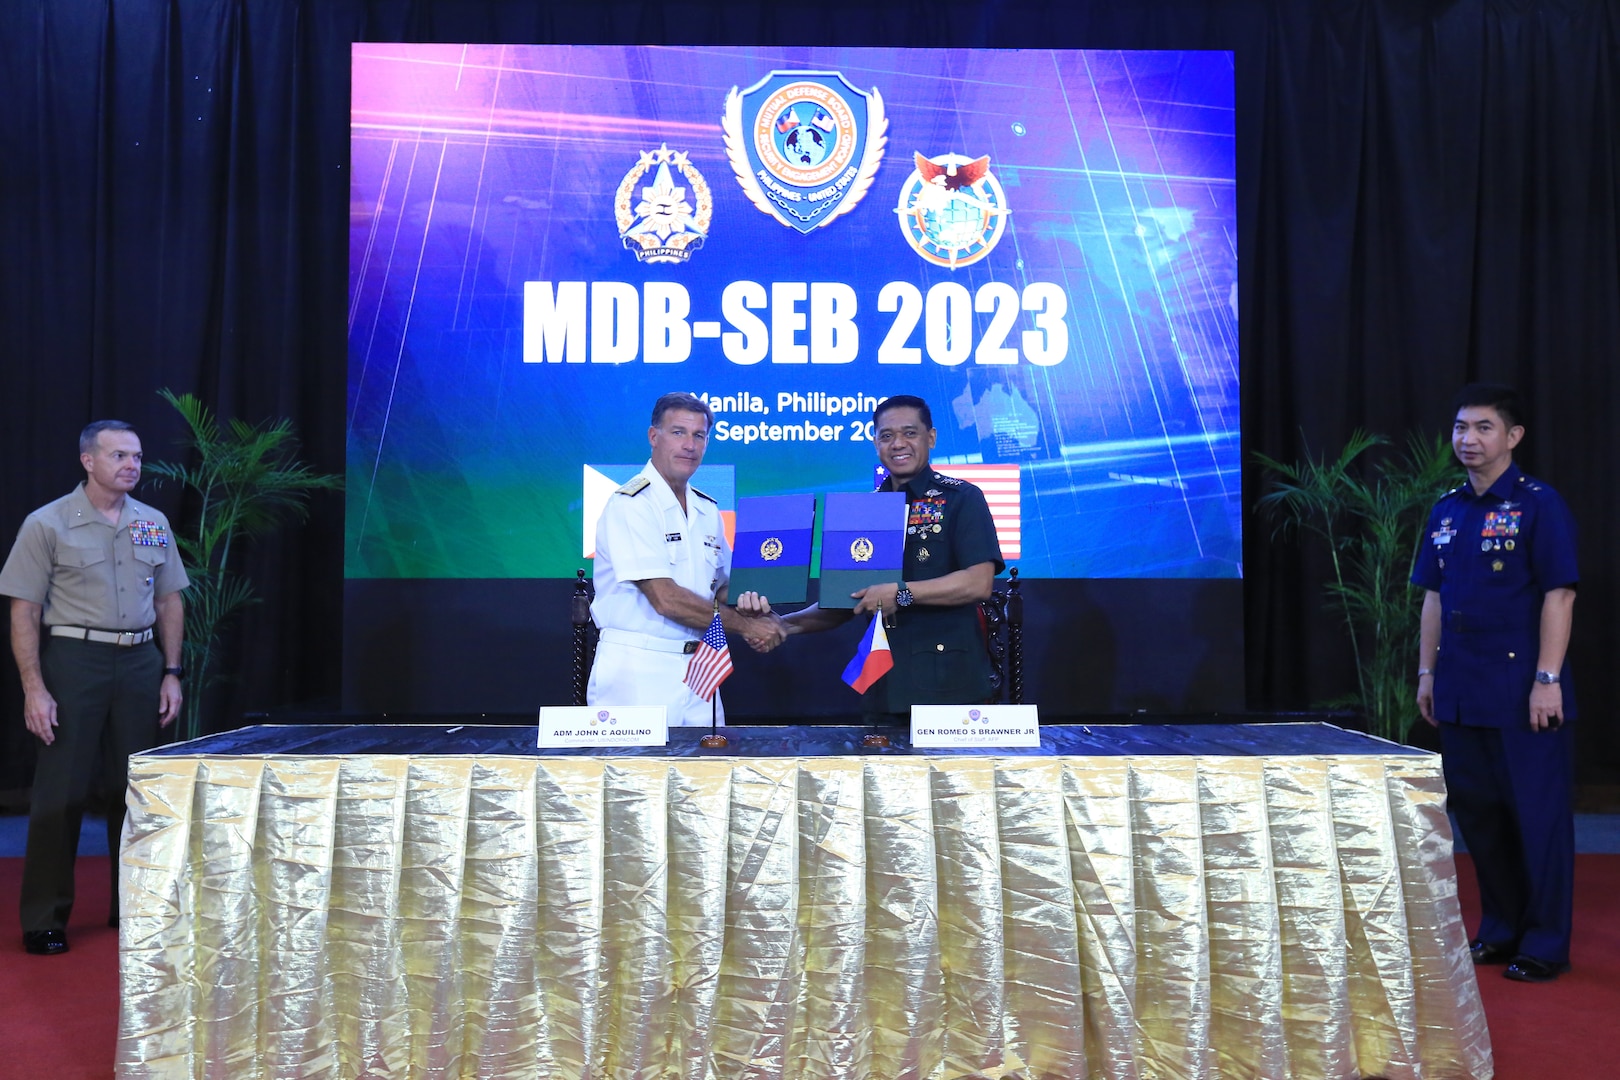 CAMP AGUINALDO, Philippines — Gen. Romeo Brawner Jr., Chief of Staff of the Armed Forces of the Philippines, and Adm. John Aquilino, Commander of U.S. Indo-Pacific Command, led the 2023 Mutual Defense Board and Security Engagement Board (MDB-SEB) at Camp Aguinaldo, Philippines, Sept. 14.